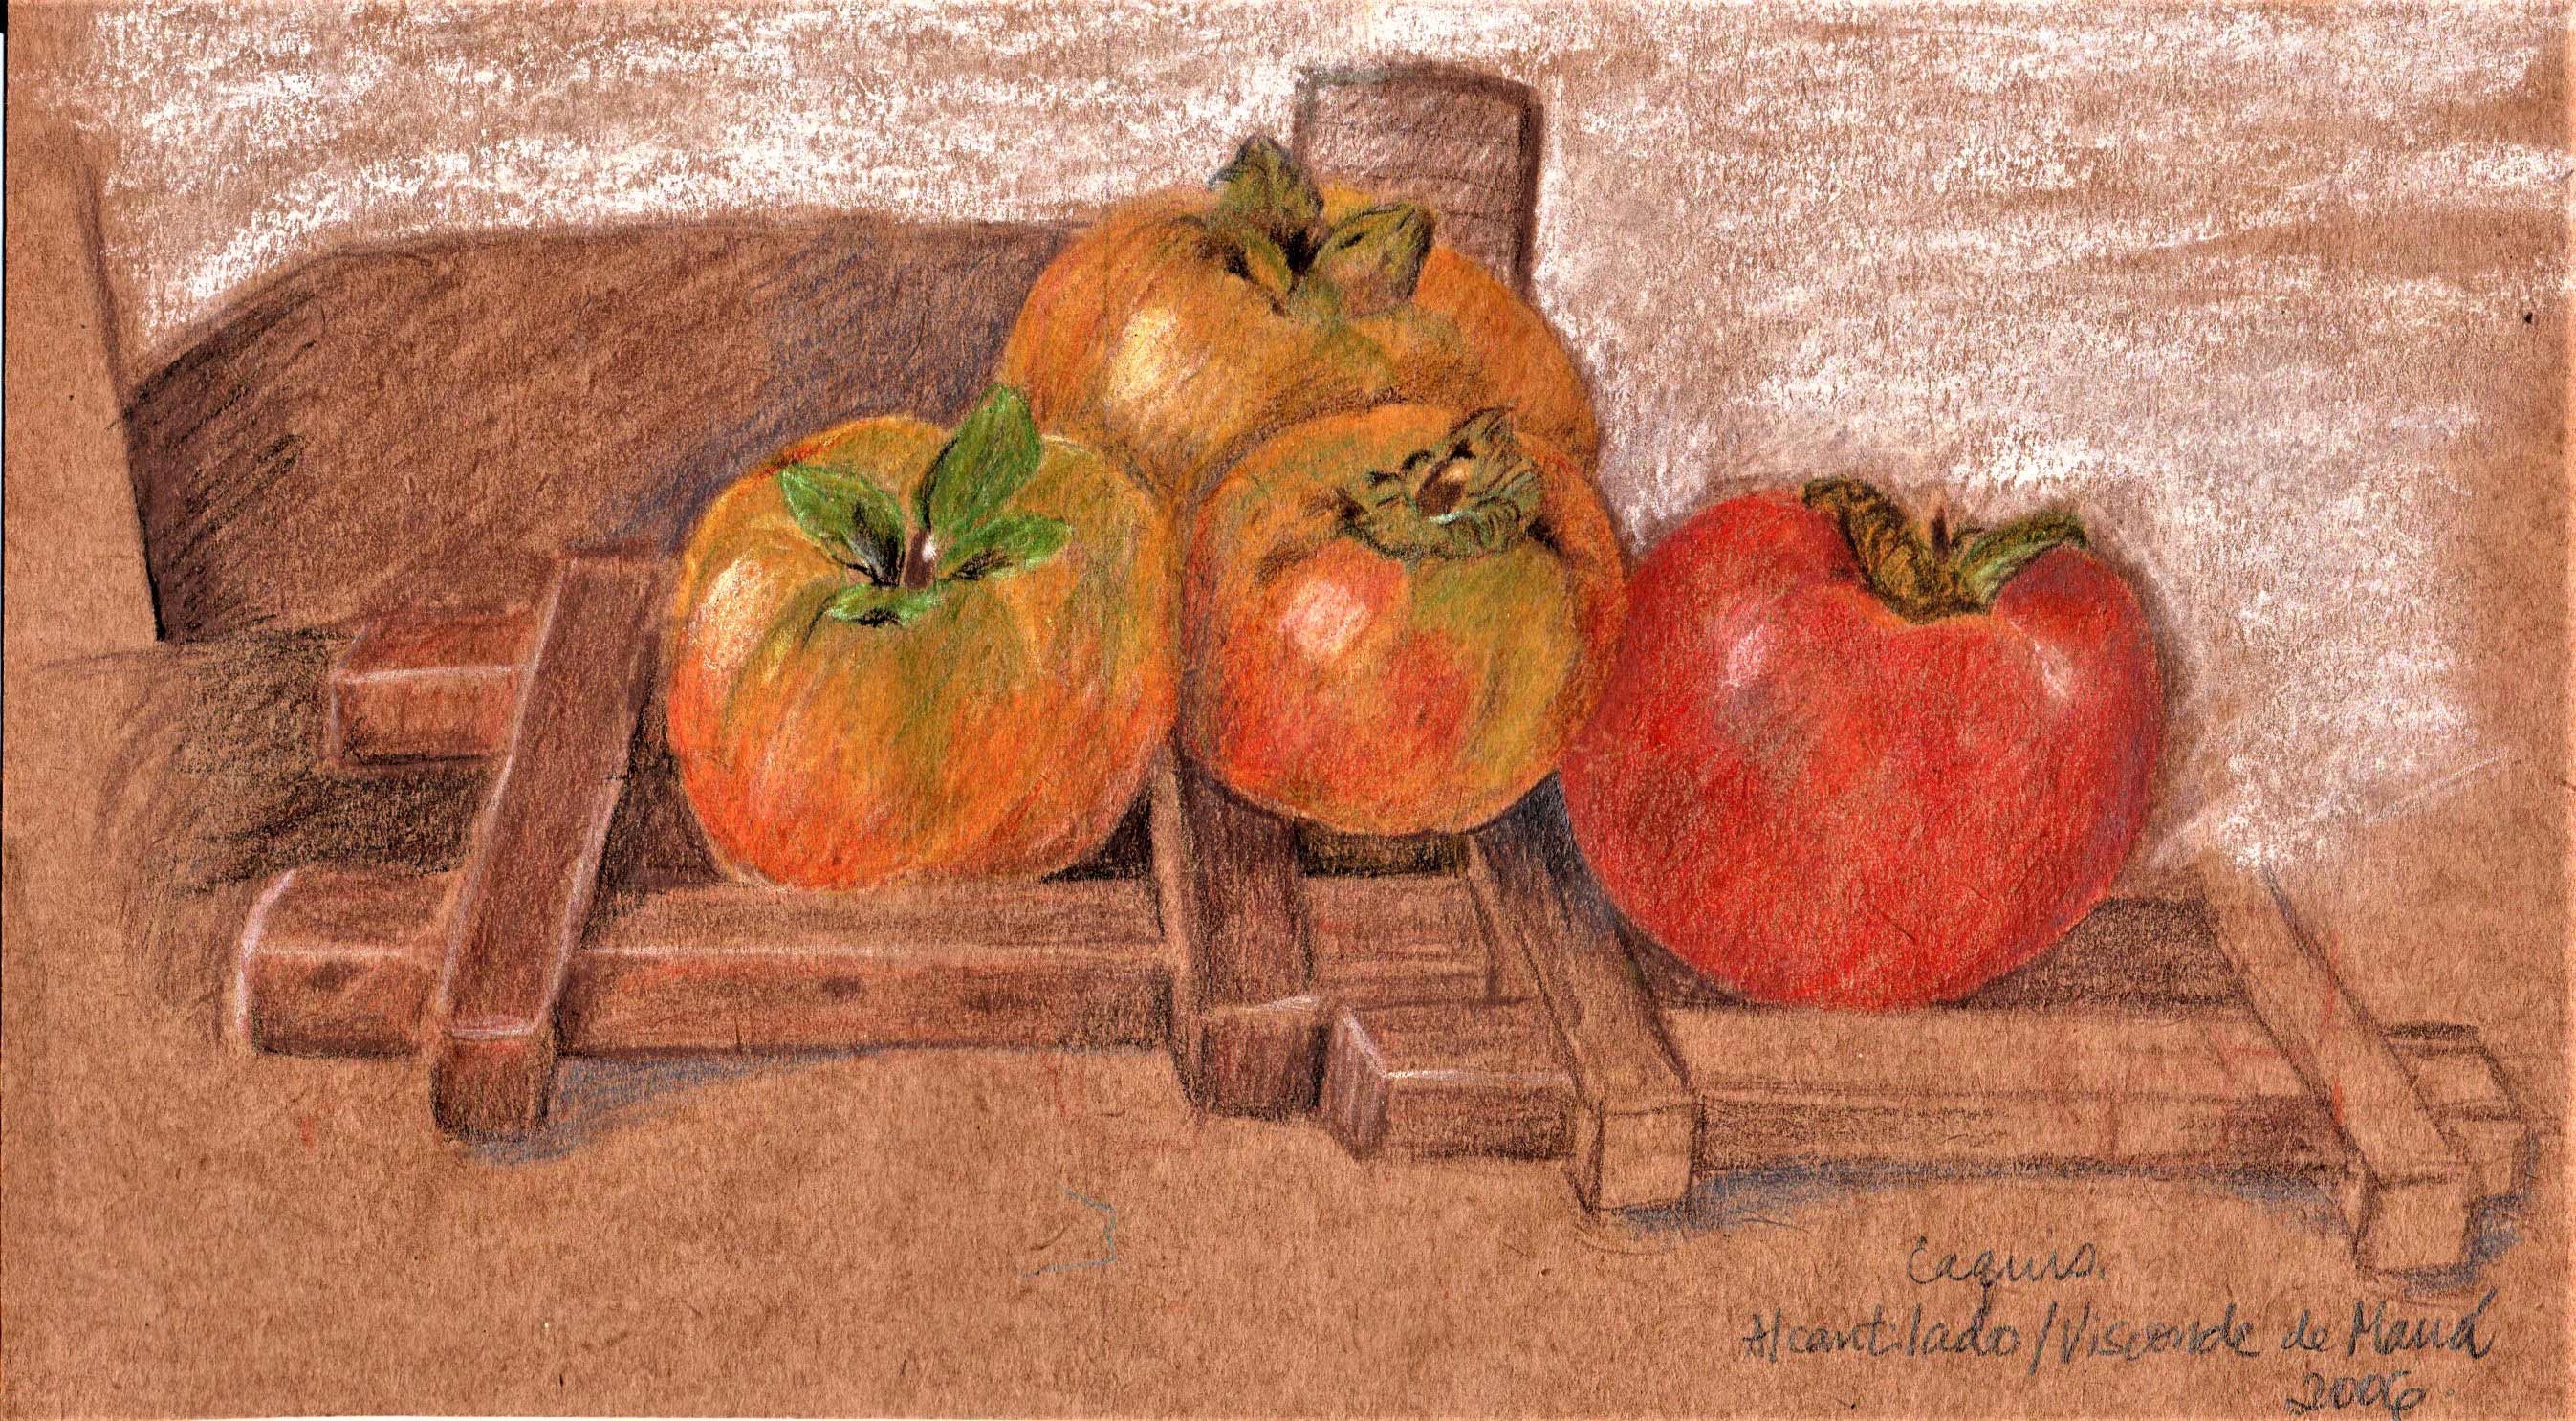 Persimmons from the Alcantilado